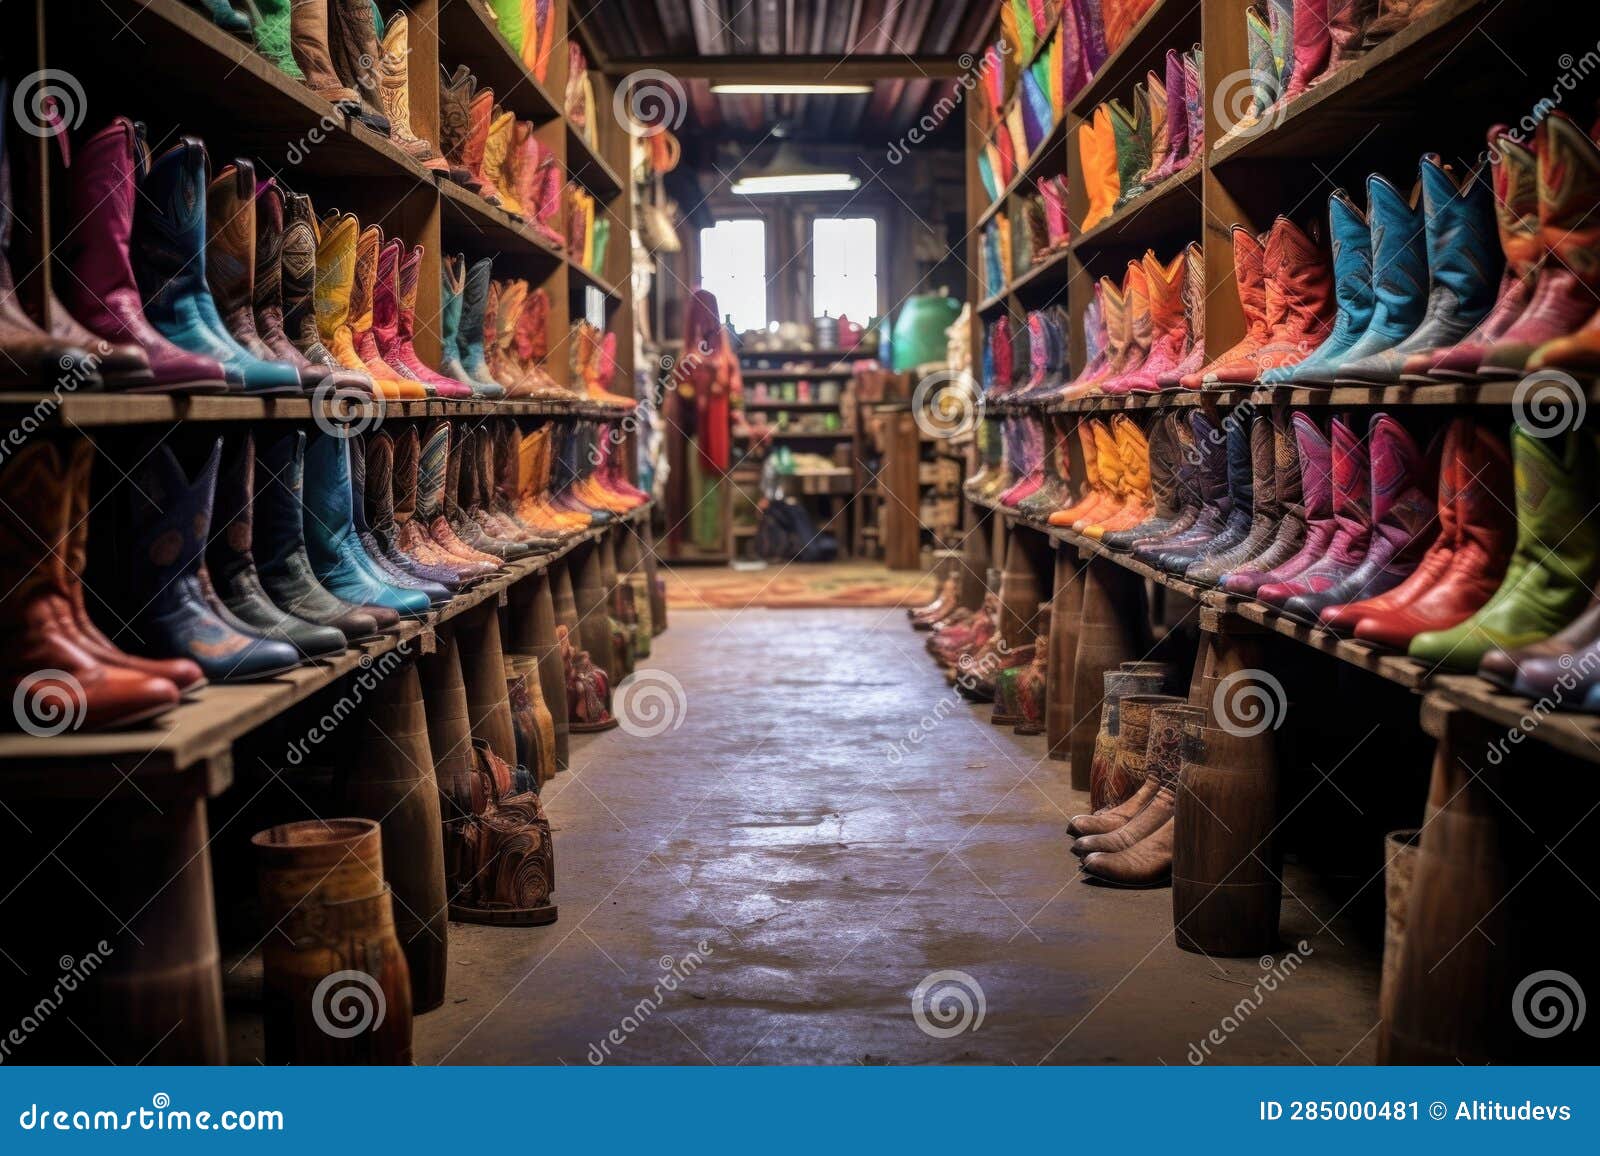 Rows of Colorful Cowboy Boots in Workshop Stock Illustration ...